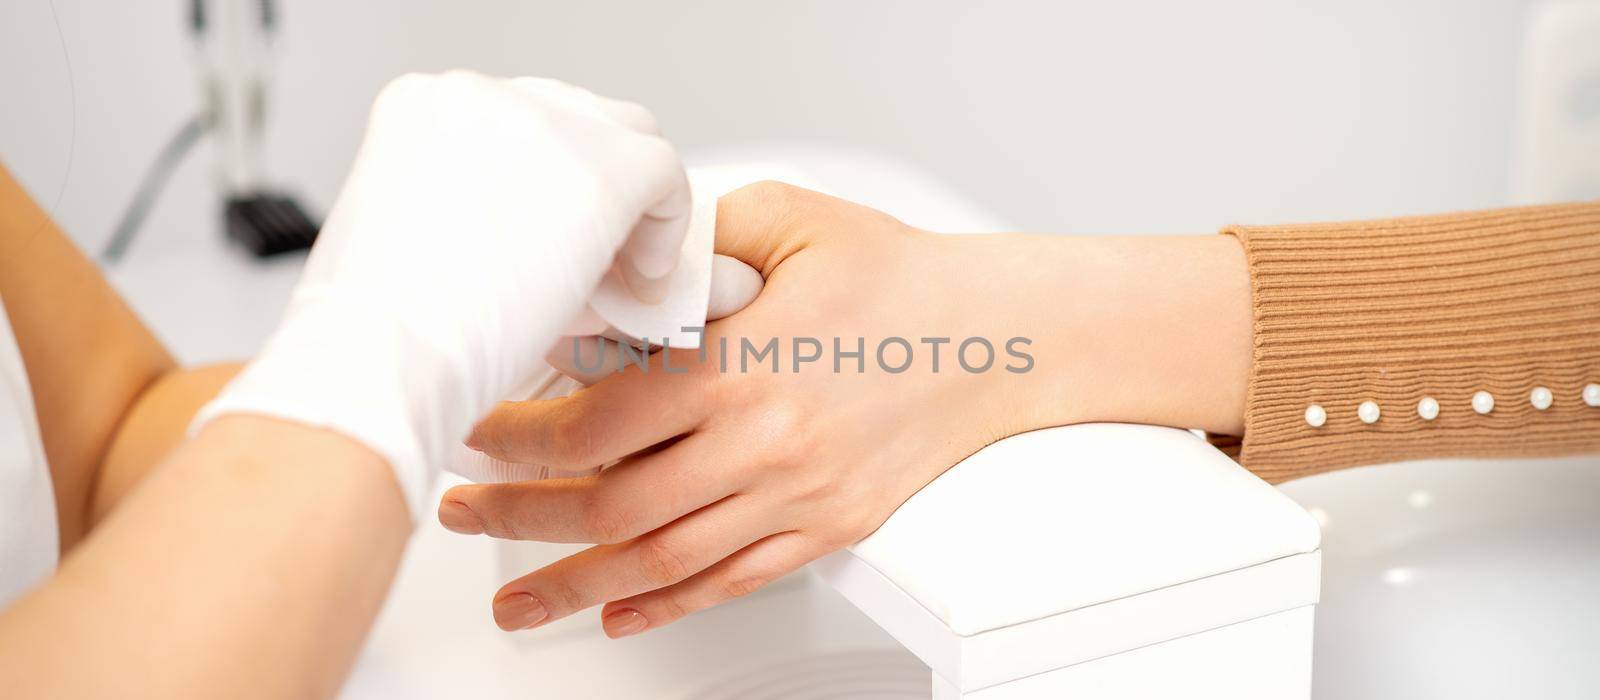 Hands of a manicurist in white protective gloves wipe female nails with a paper napkin in the salon. by okskukuruza